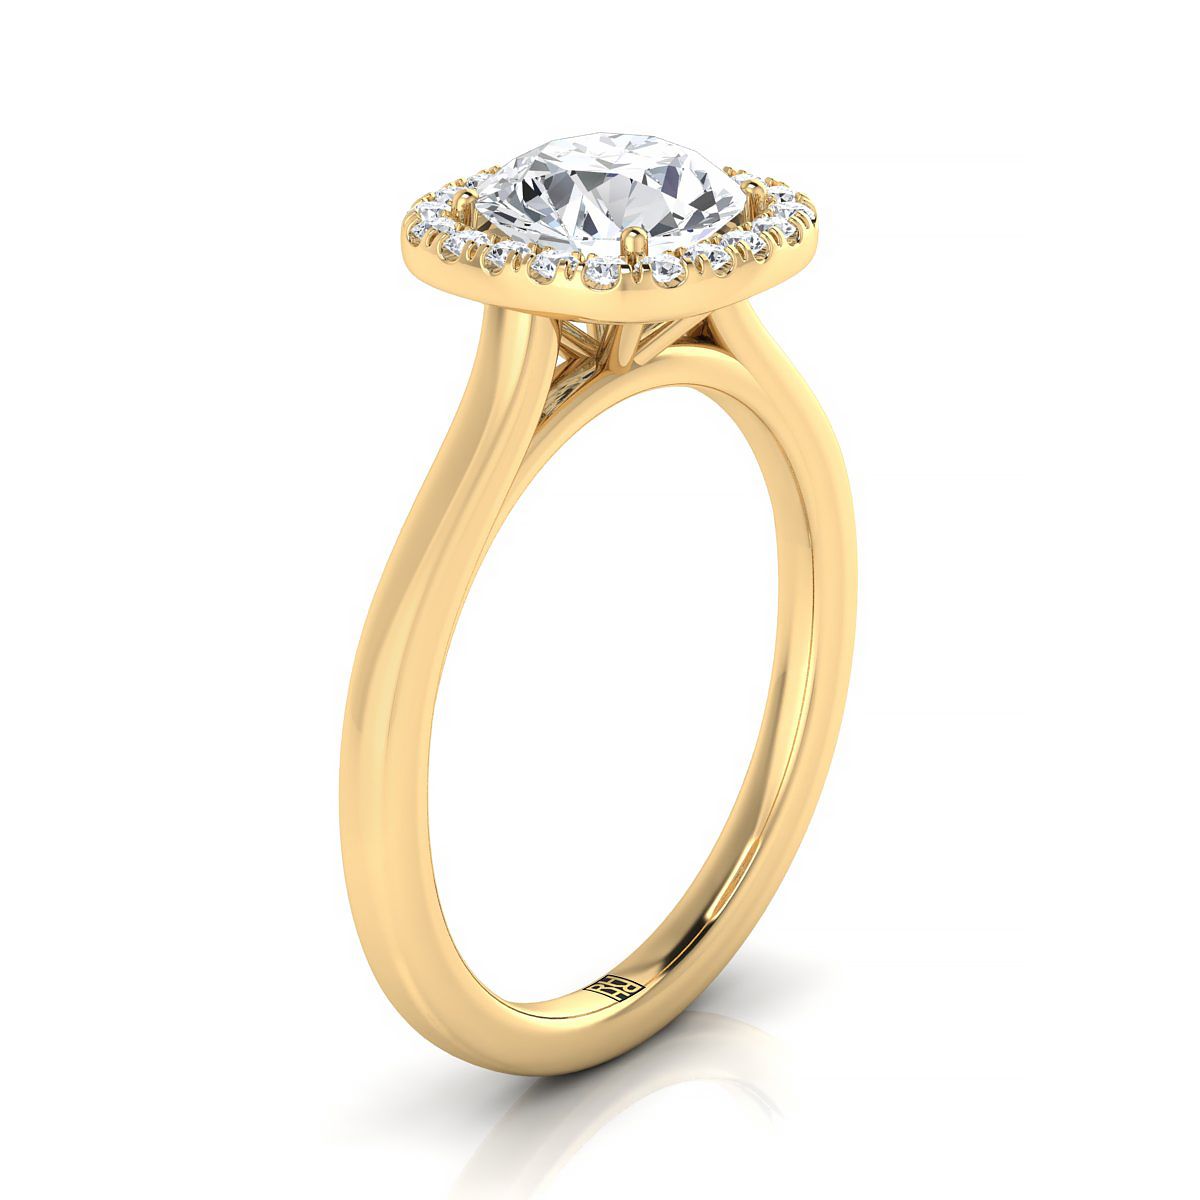 18K Yellow Gold Round Brilliant Diamond Modern Halo French Pave Engagement Ring -1/6ctw